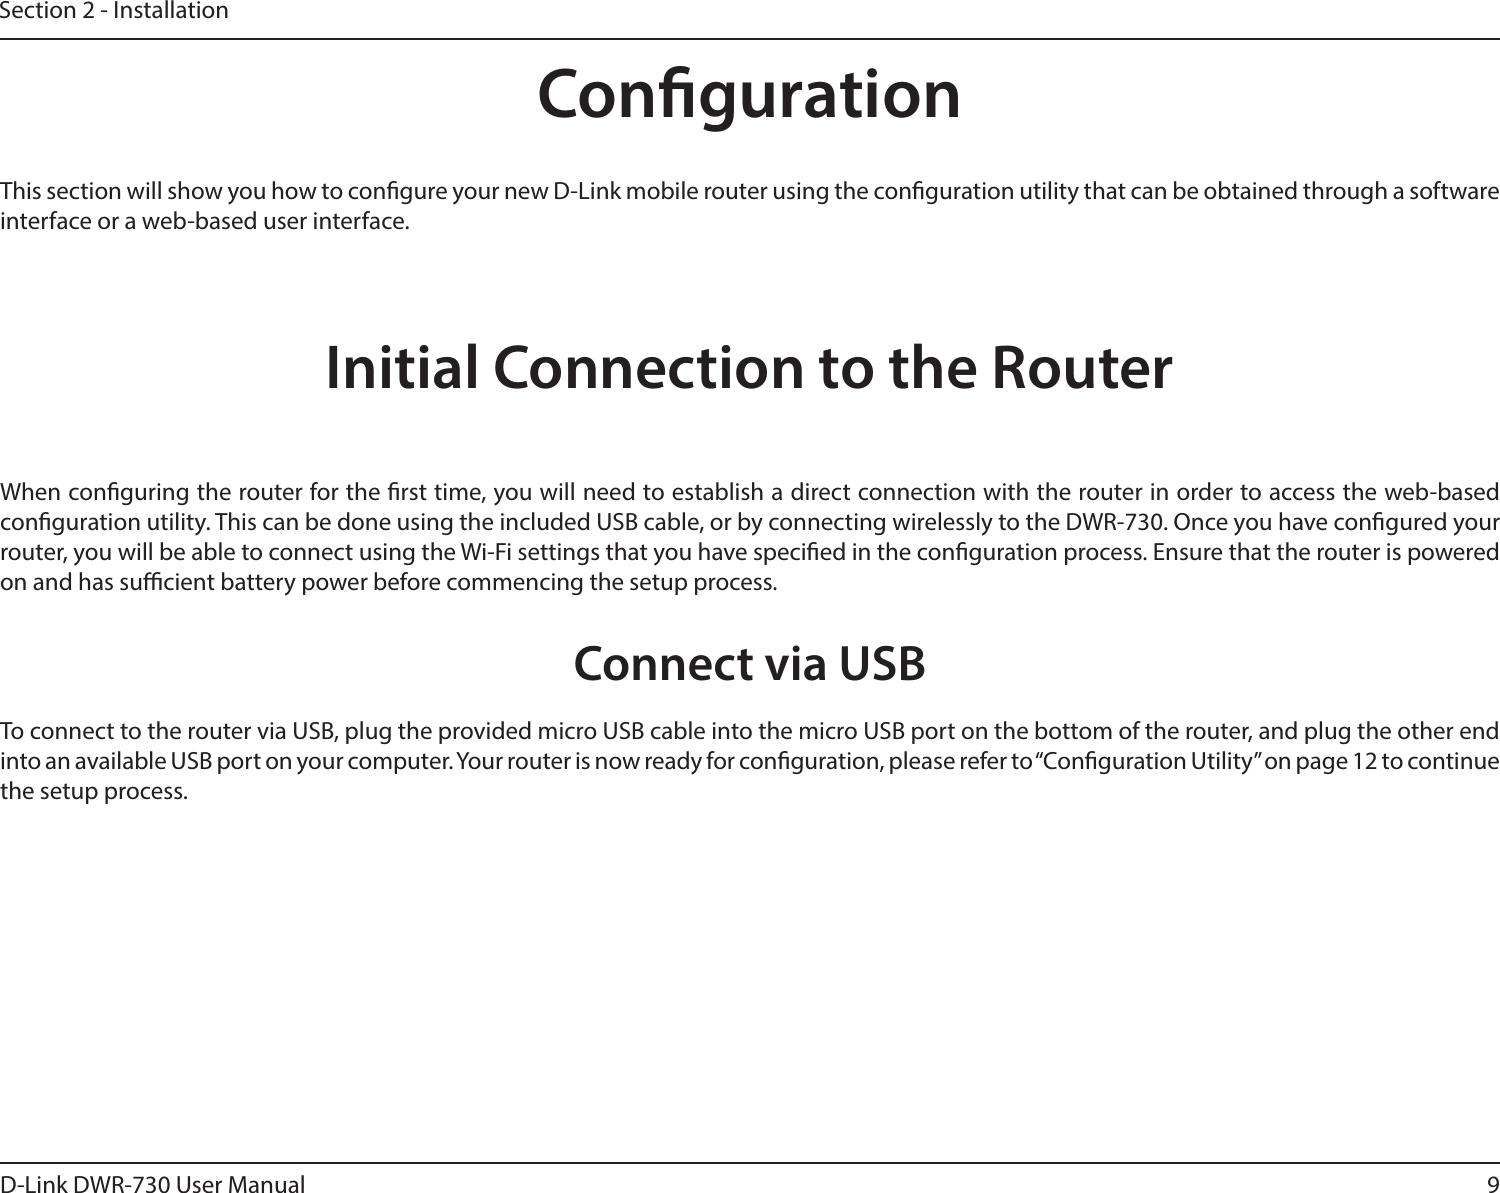 9D-Link DWR-730 User ManualSection 2 - InstallationCongurationInitial Connection to the RouterThis section will show you how to congure your new D-Link mobile router using the conguration utility that can be obtained through a software interface or a web-based user interface.When conguring the router for the rst time, you will need to establish a direct connection with the router in order to access the web-based conguration utility. This can be done using the included USB cable, or by connecting wirelessly to the DWR-730. Once you have congured your router, you will be able to connect using the Wi-Fi settings that you have specied in the conguration process. Ensure that the router is powered on and has sucient battery power before commencing the setup process.Connect via USBTo connect to the router via USB, plug the provided micro USB cable into the micro USB port on the bottom of the router, and plug the other end into an available USB port on your computer. Your router is now ready for conguration, please refer to “Conguration Utility” on page 12 to continue the setup process.